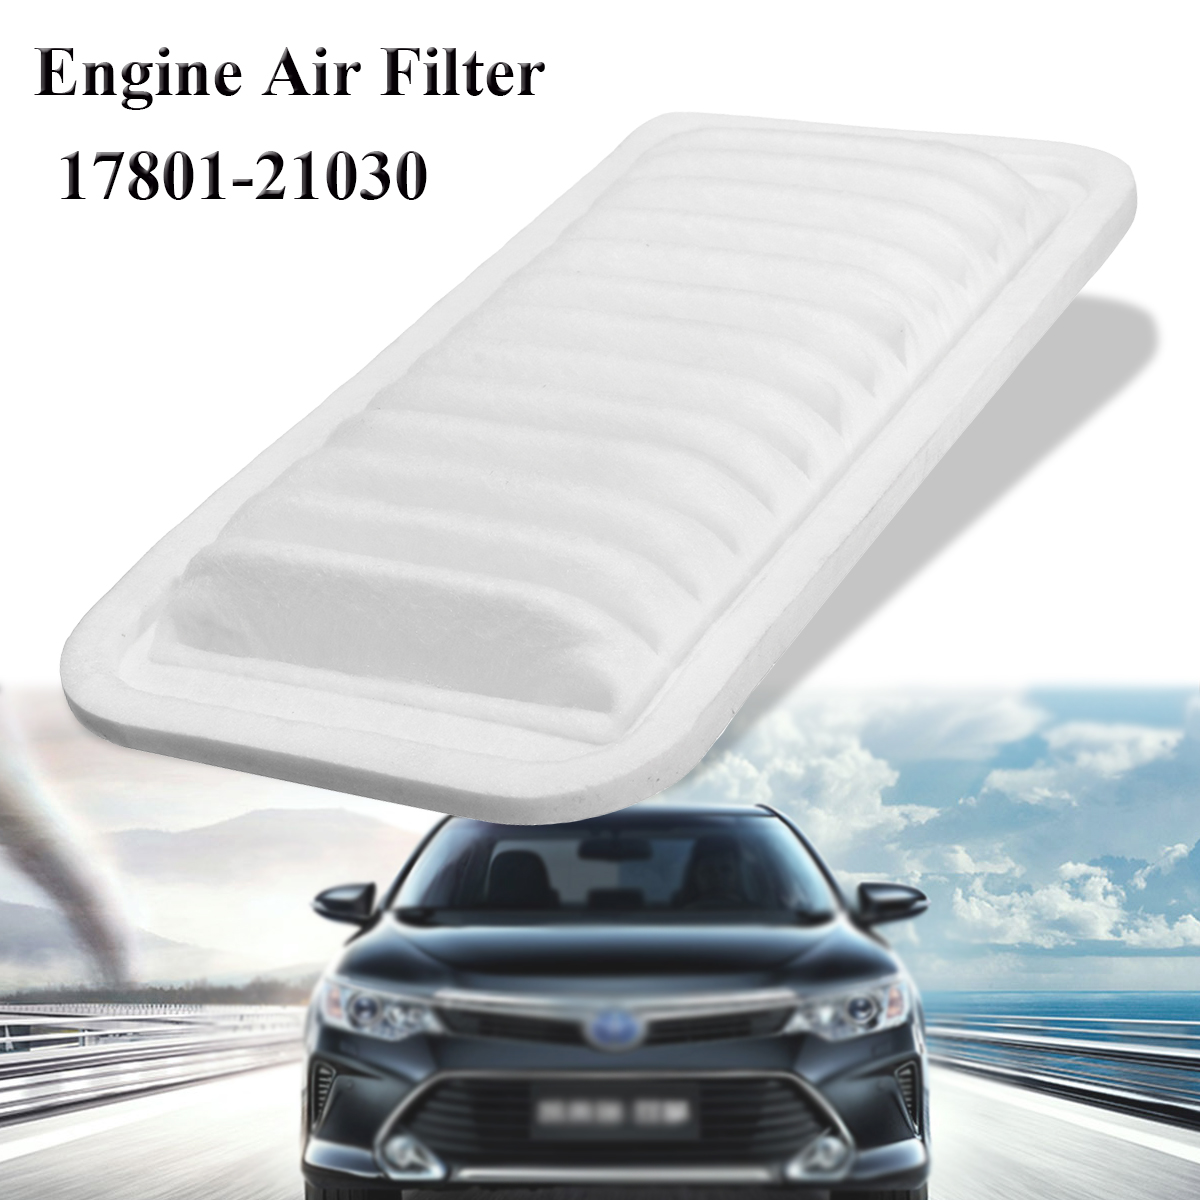 Blue-And-White-Engine-Air-Filter-For-Toyota-Yaris-Echo-Scion-XA-XB-00-05-1335820